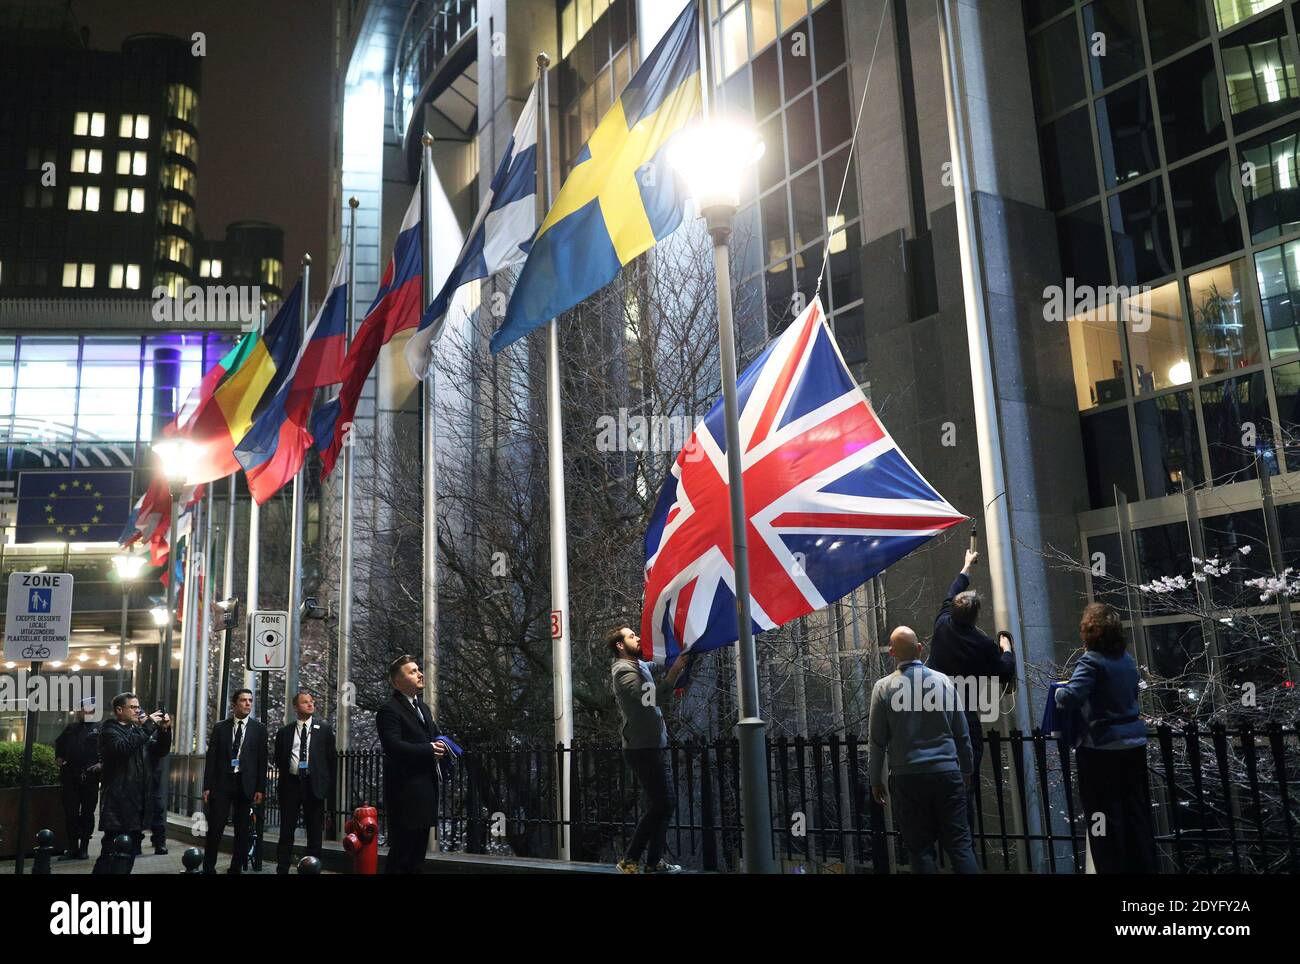 File photo dated 31/01/20 of The Union flag being taken down outside the European Parliament in Brussels, Belgium, ahead of the UK leaving the European Union. The UK and EU have reached a post-Brexit trade agreement. Stock Photo